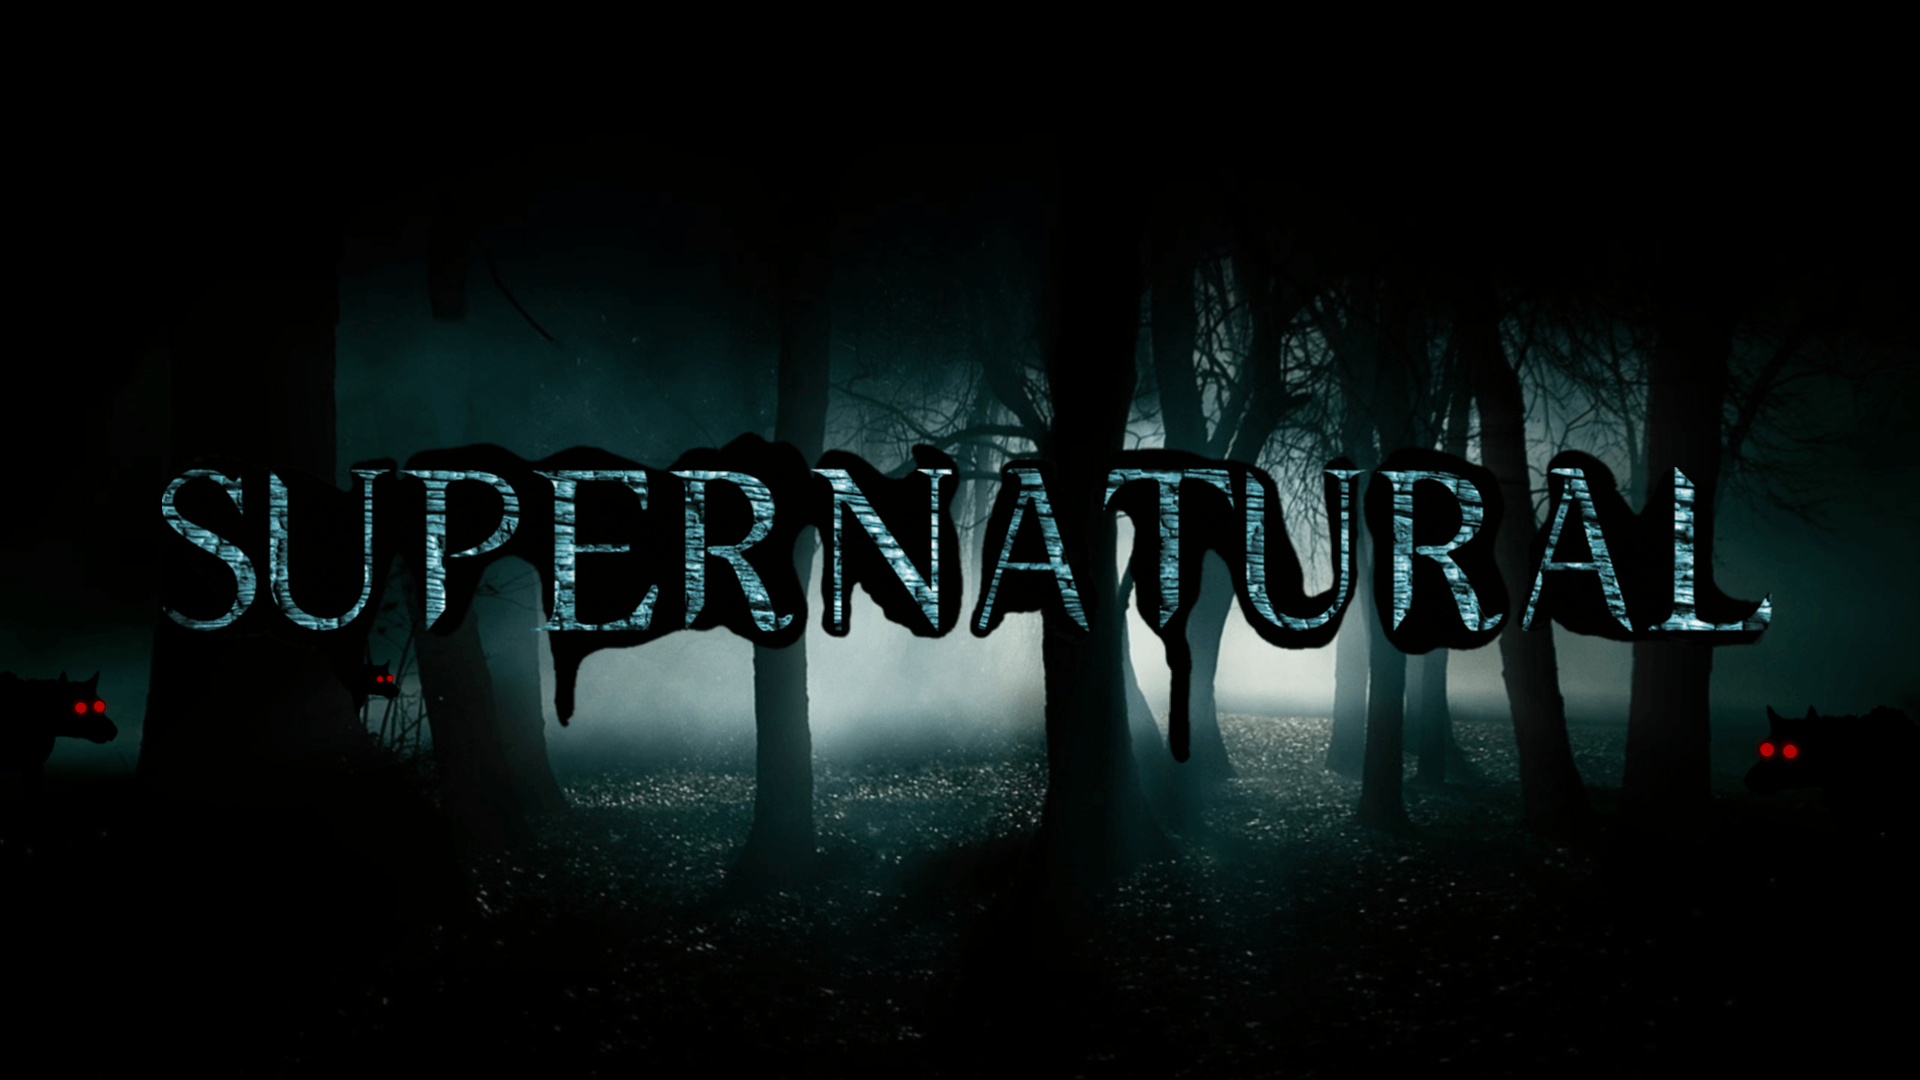 Music Love image supernatural HD wallpaper and background photo